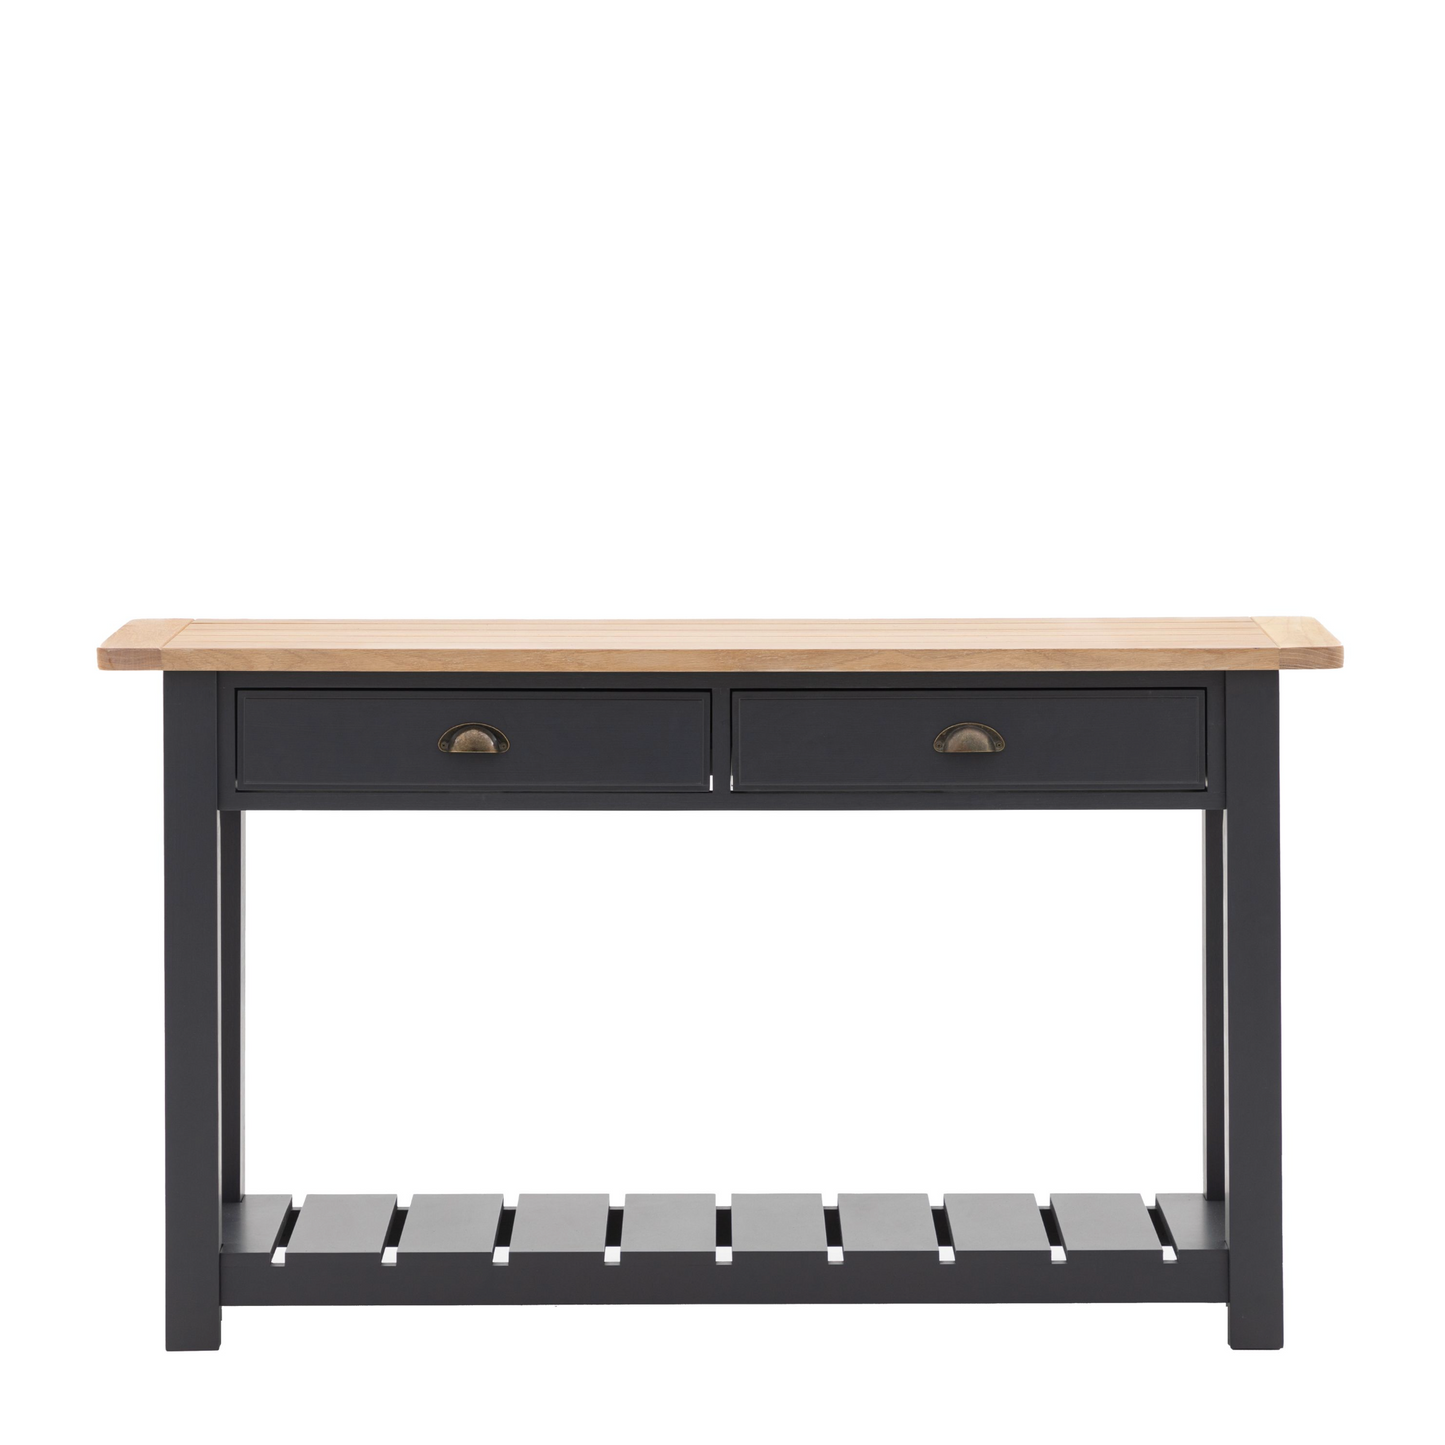 A Meteor-colored Buckland Console Table (w)1400x(d)380x(h)800mm with two drawers for interior decor.